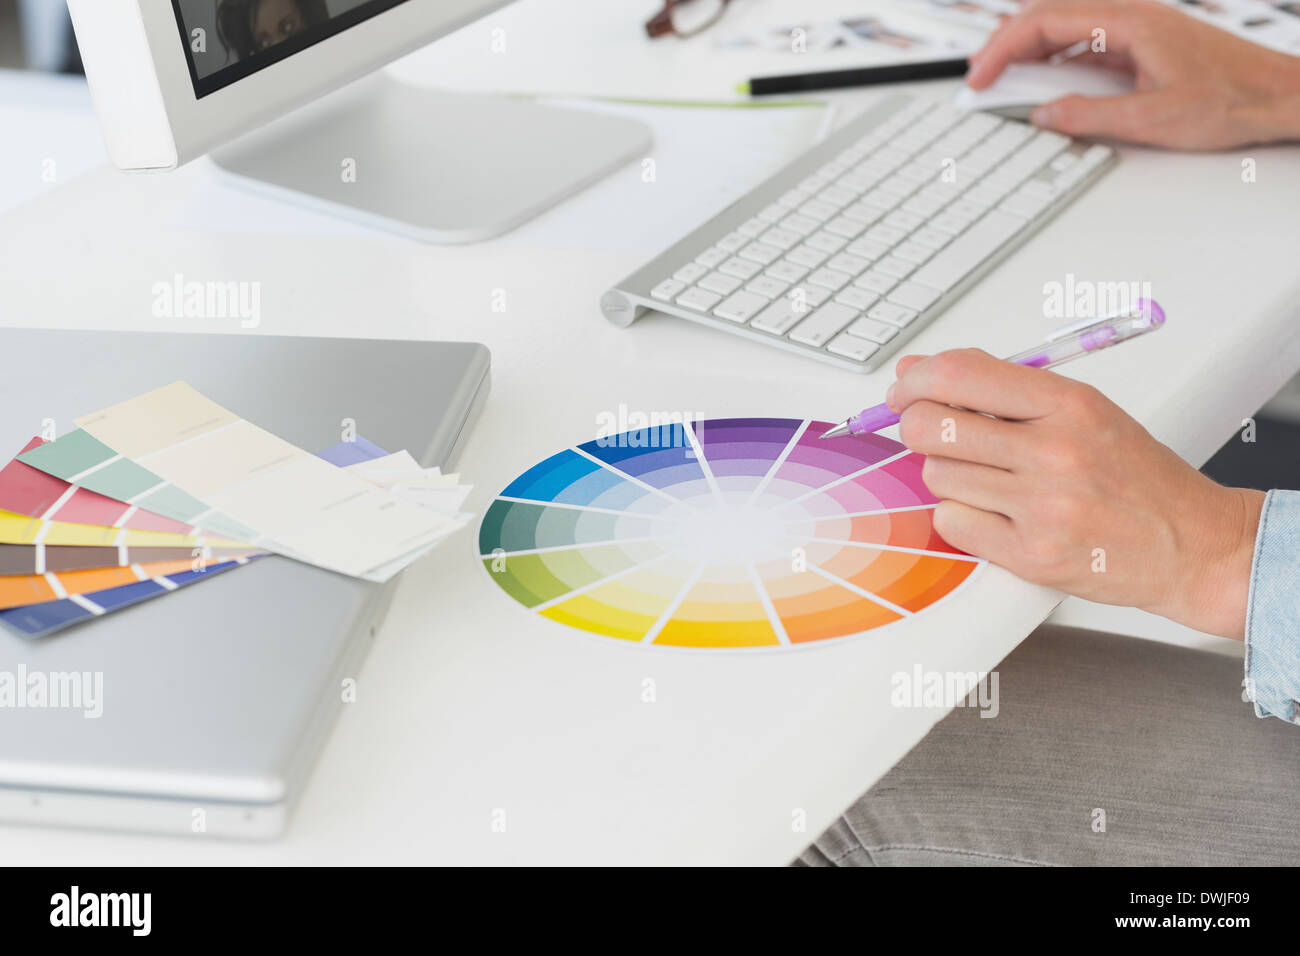 Designer working at her desk using a colour wheel Stock Photo